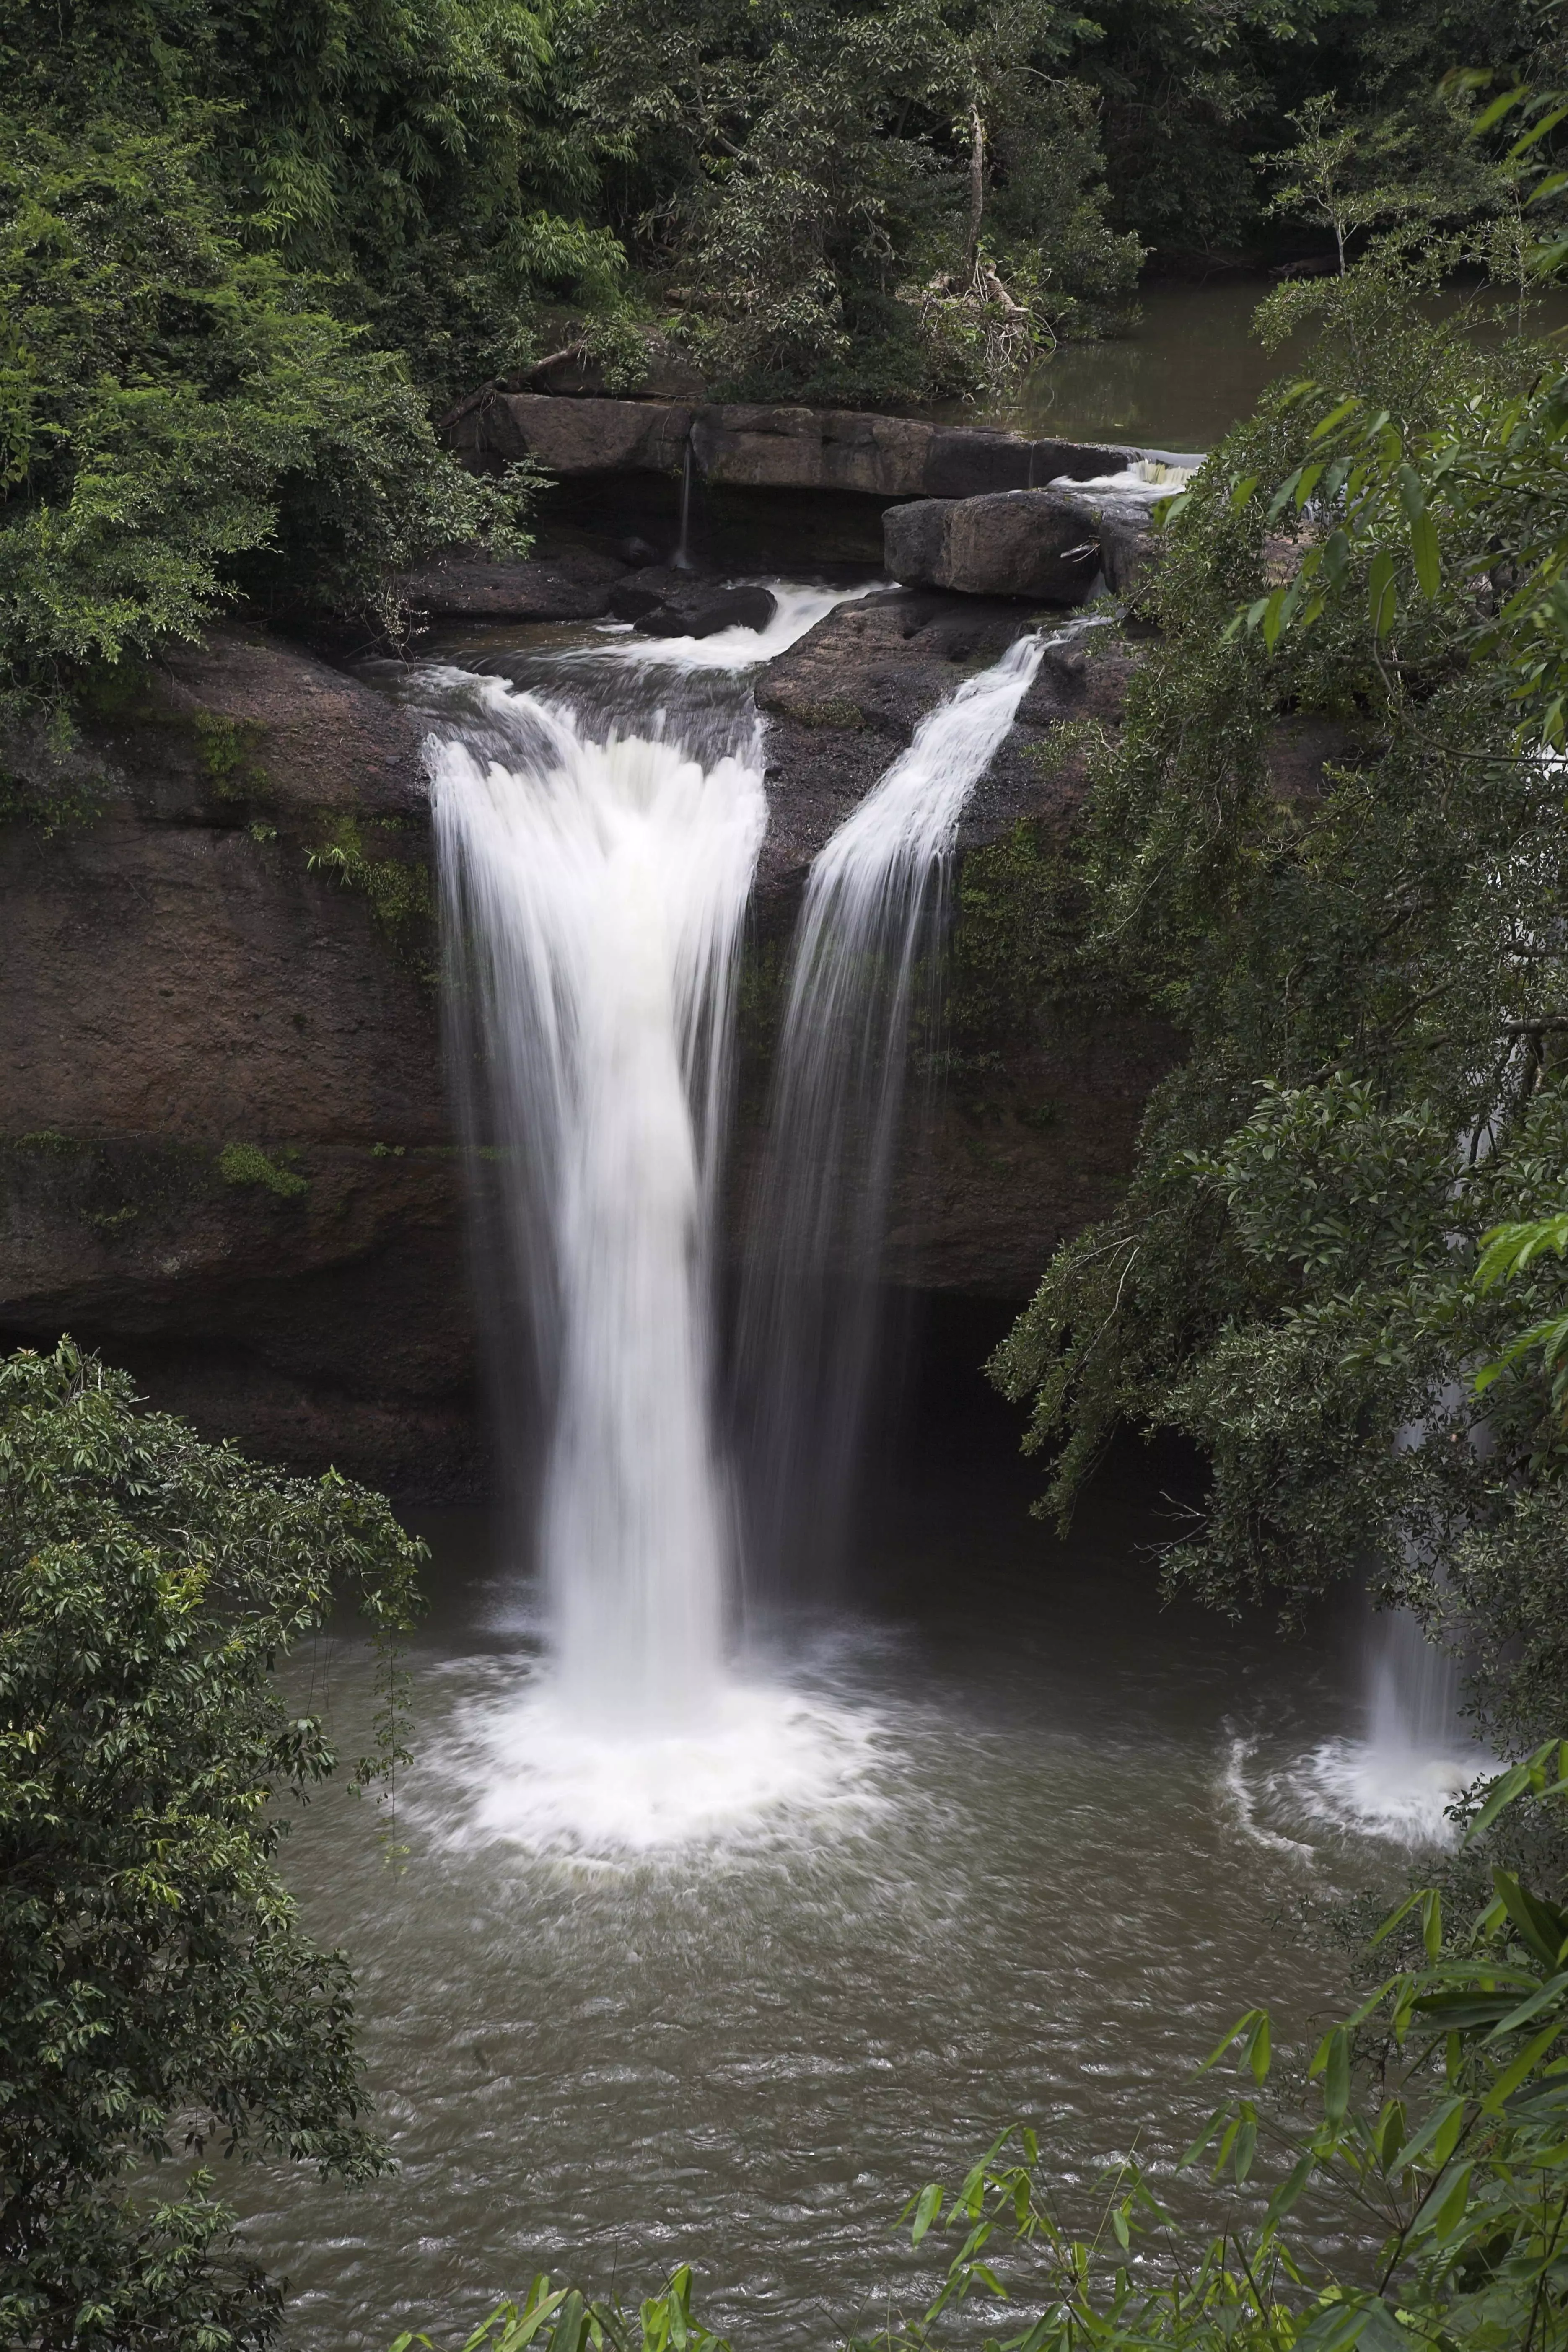 Khao Yai also has some lovely waterfalls.